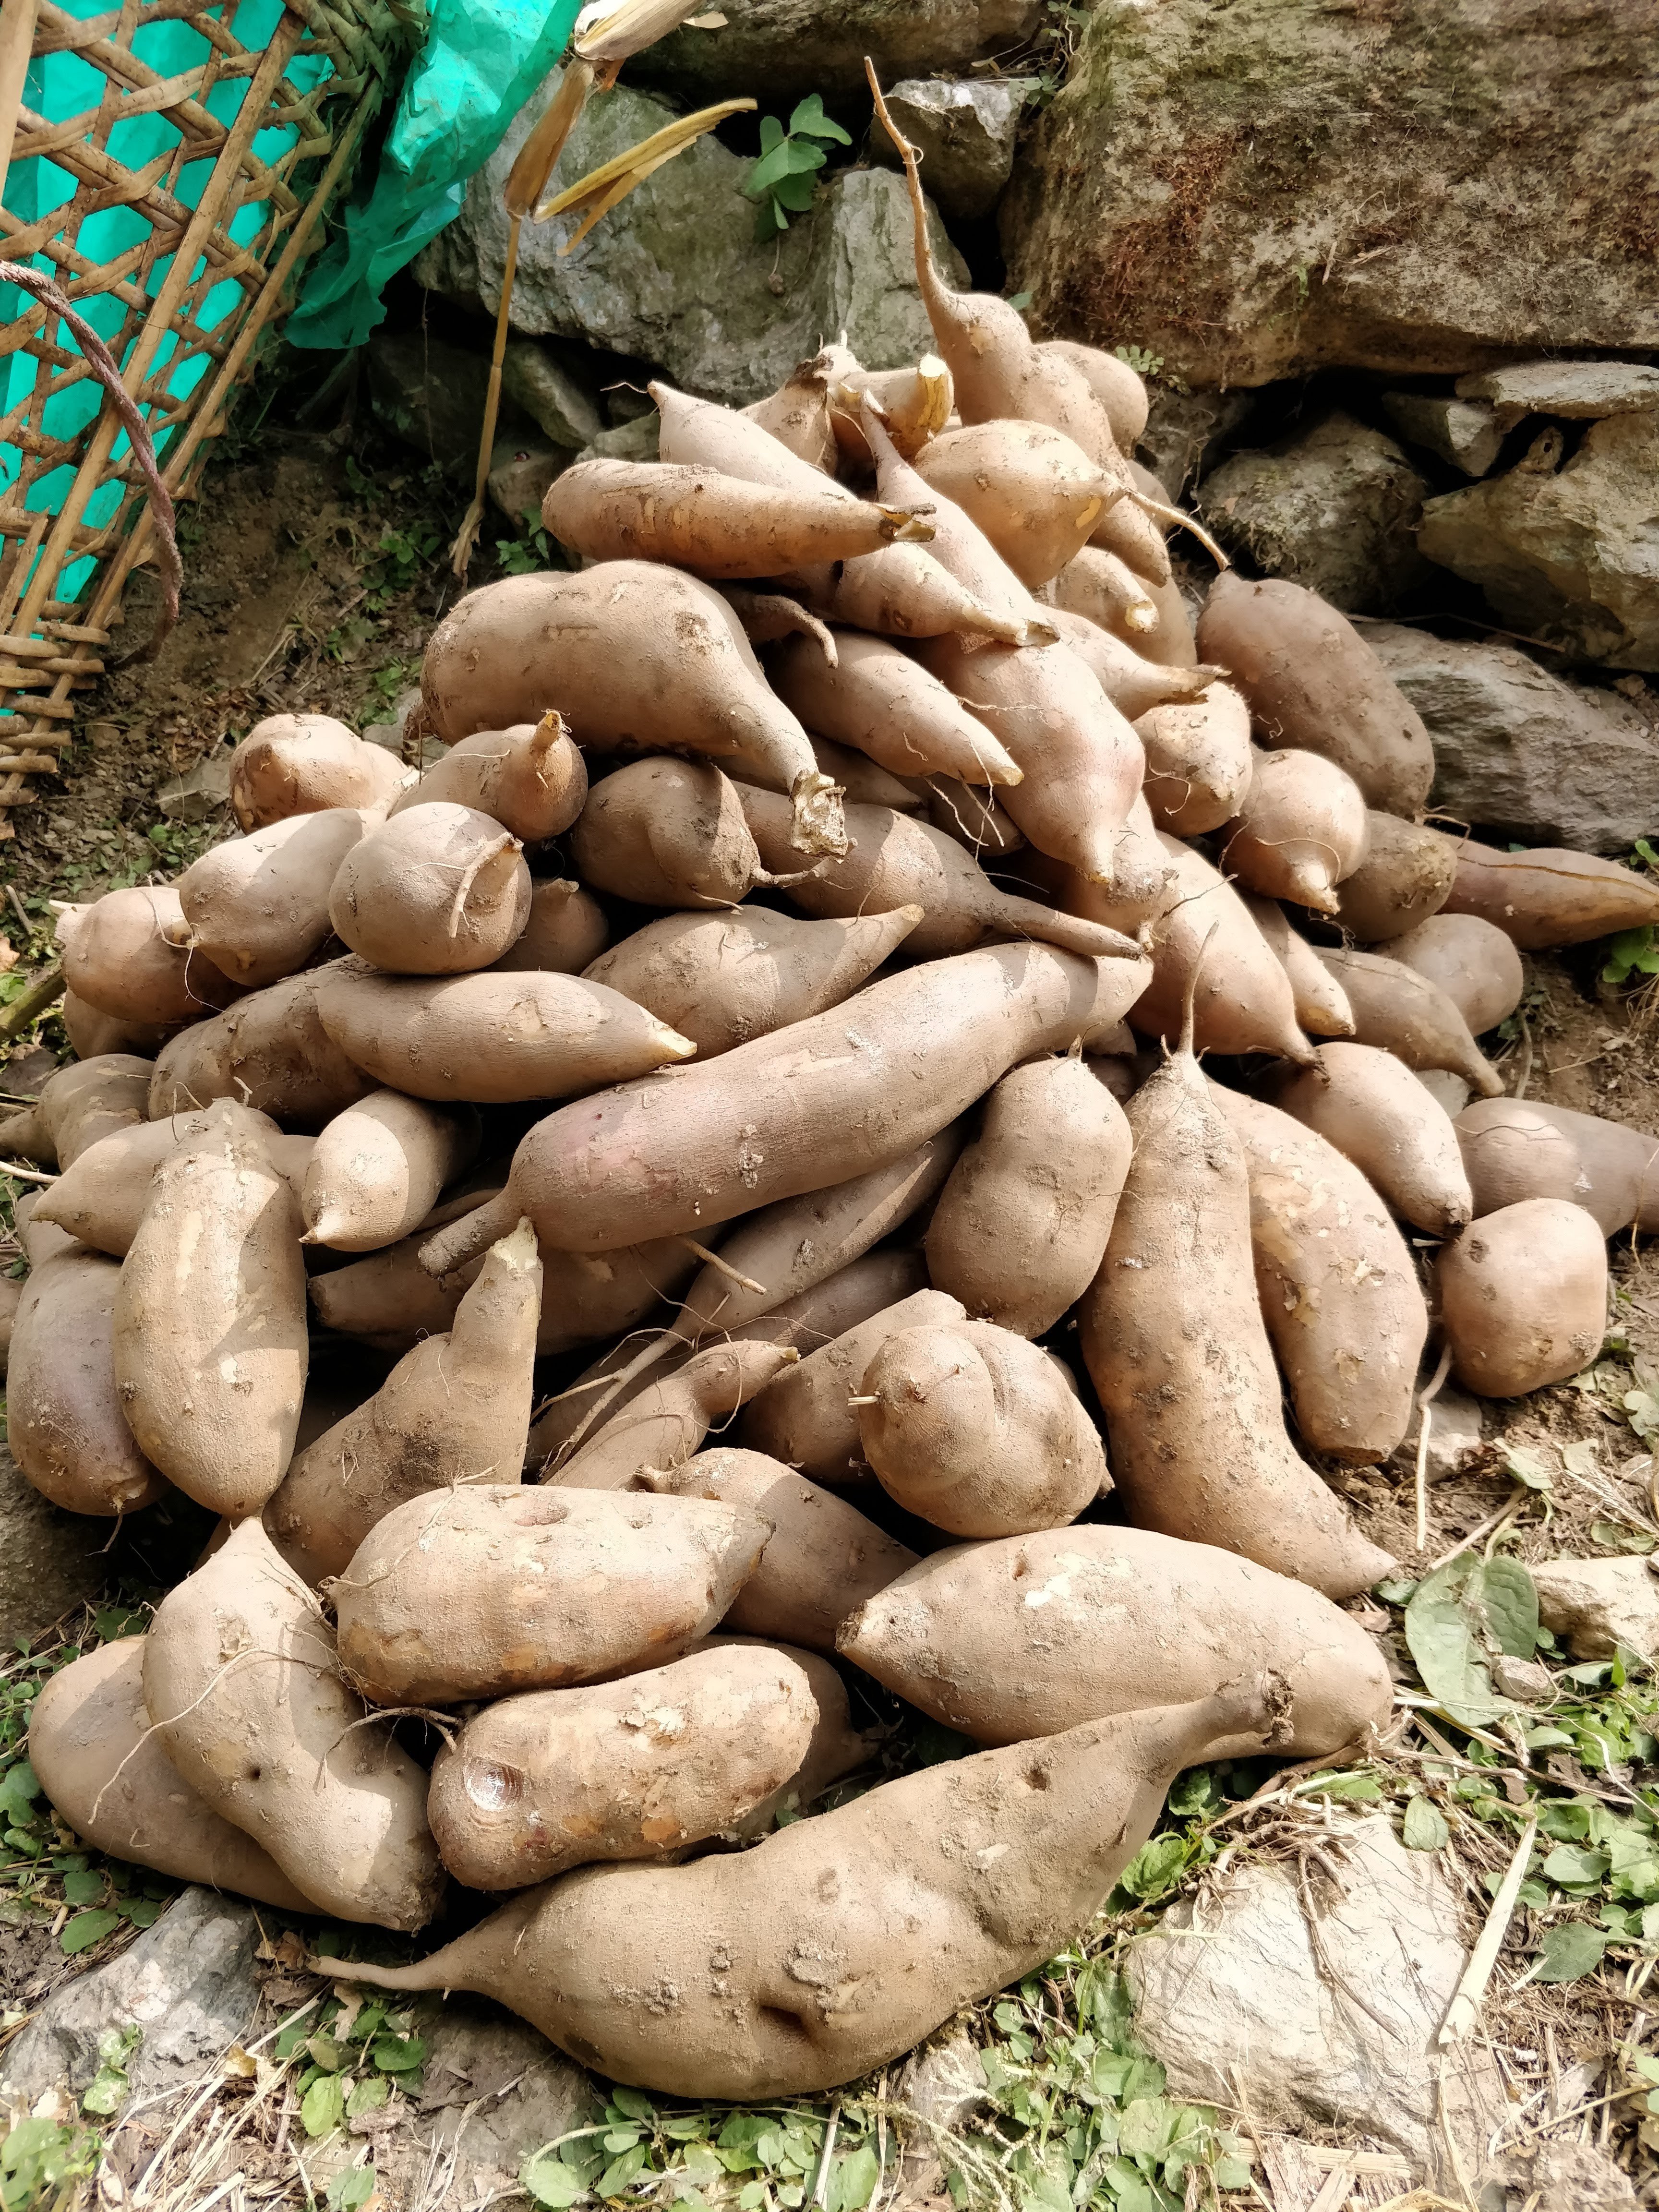 Freshly harvested yacon. The tuber tastes sweet, but has few calories and is mostly indigestible by humans, making it ideal for dieters and diabetics.